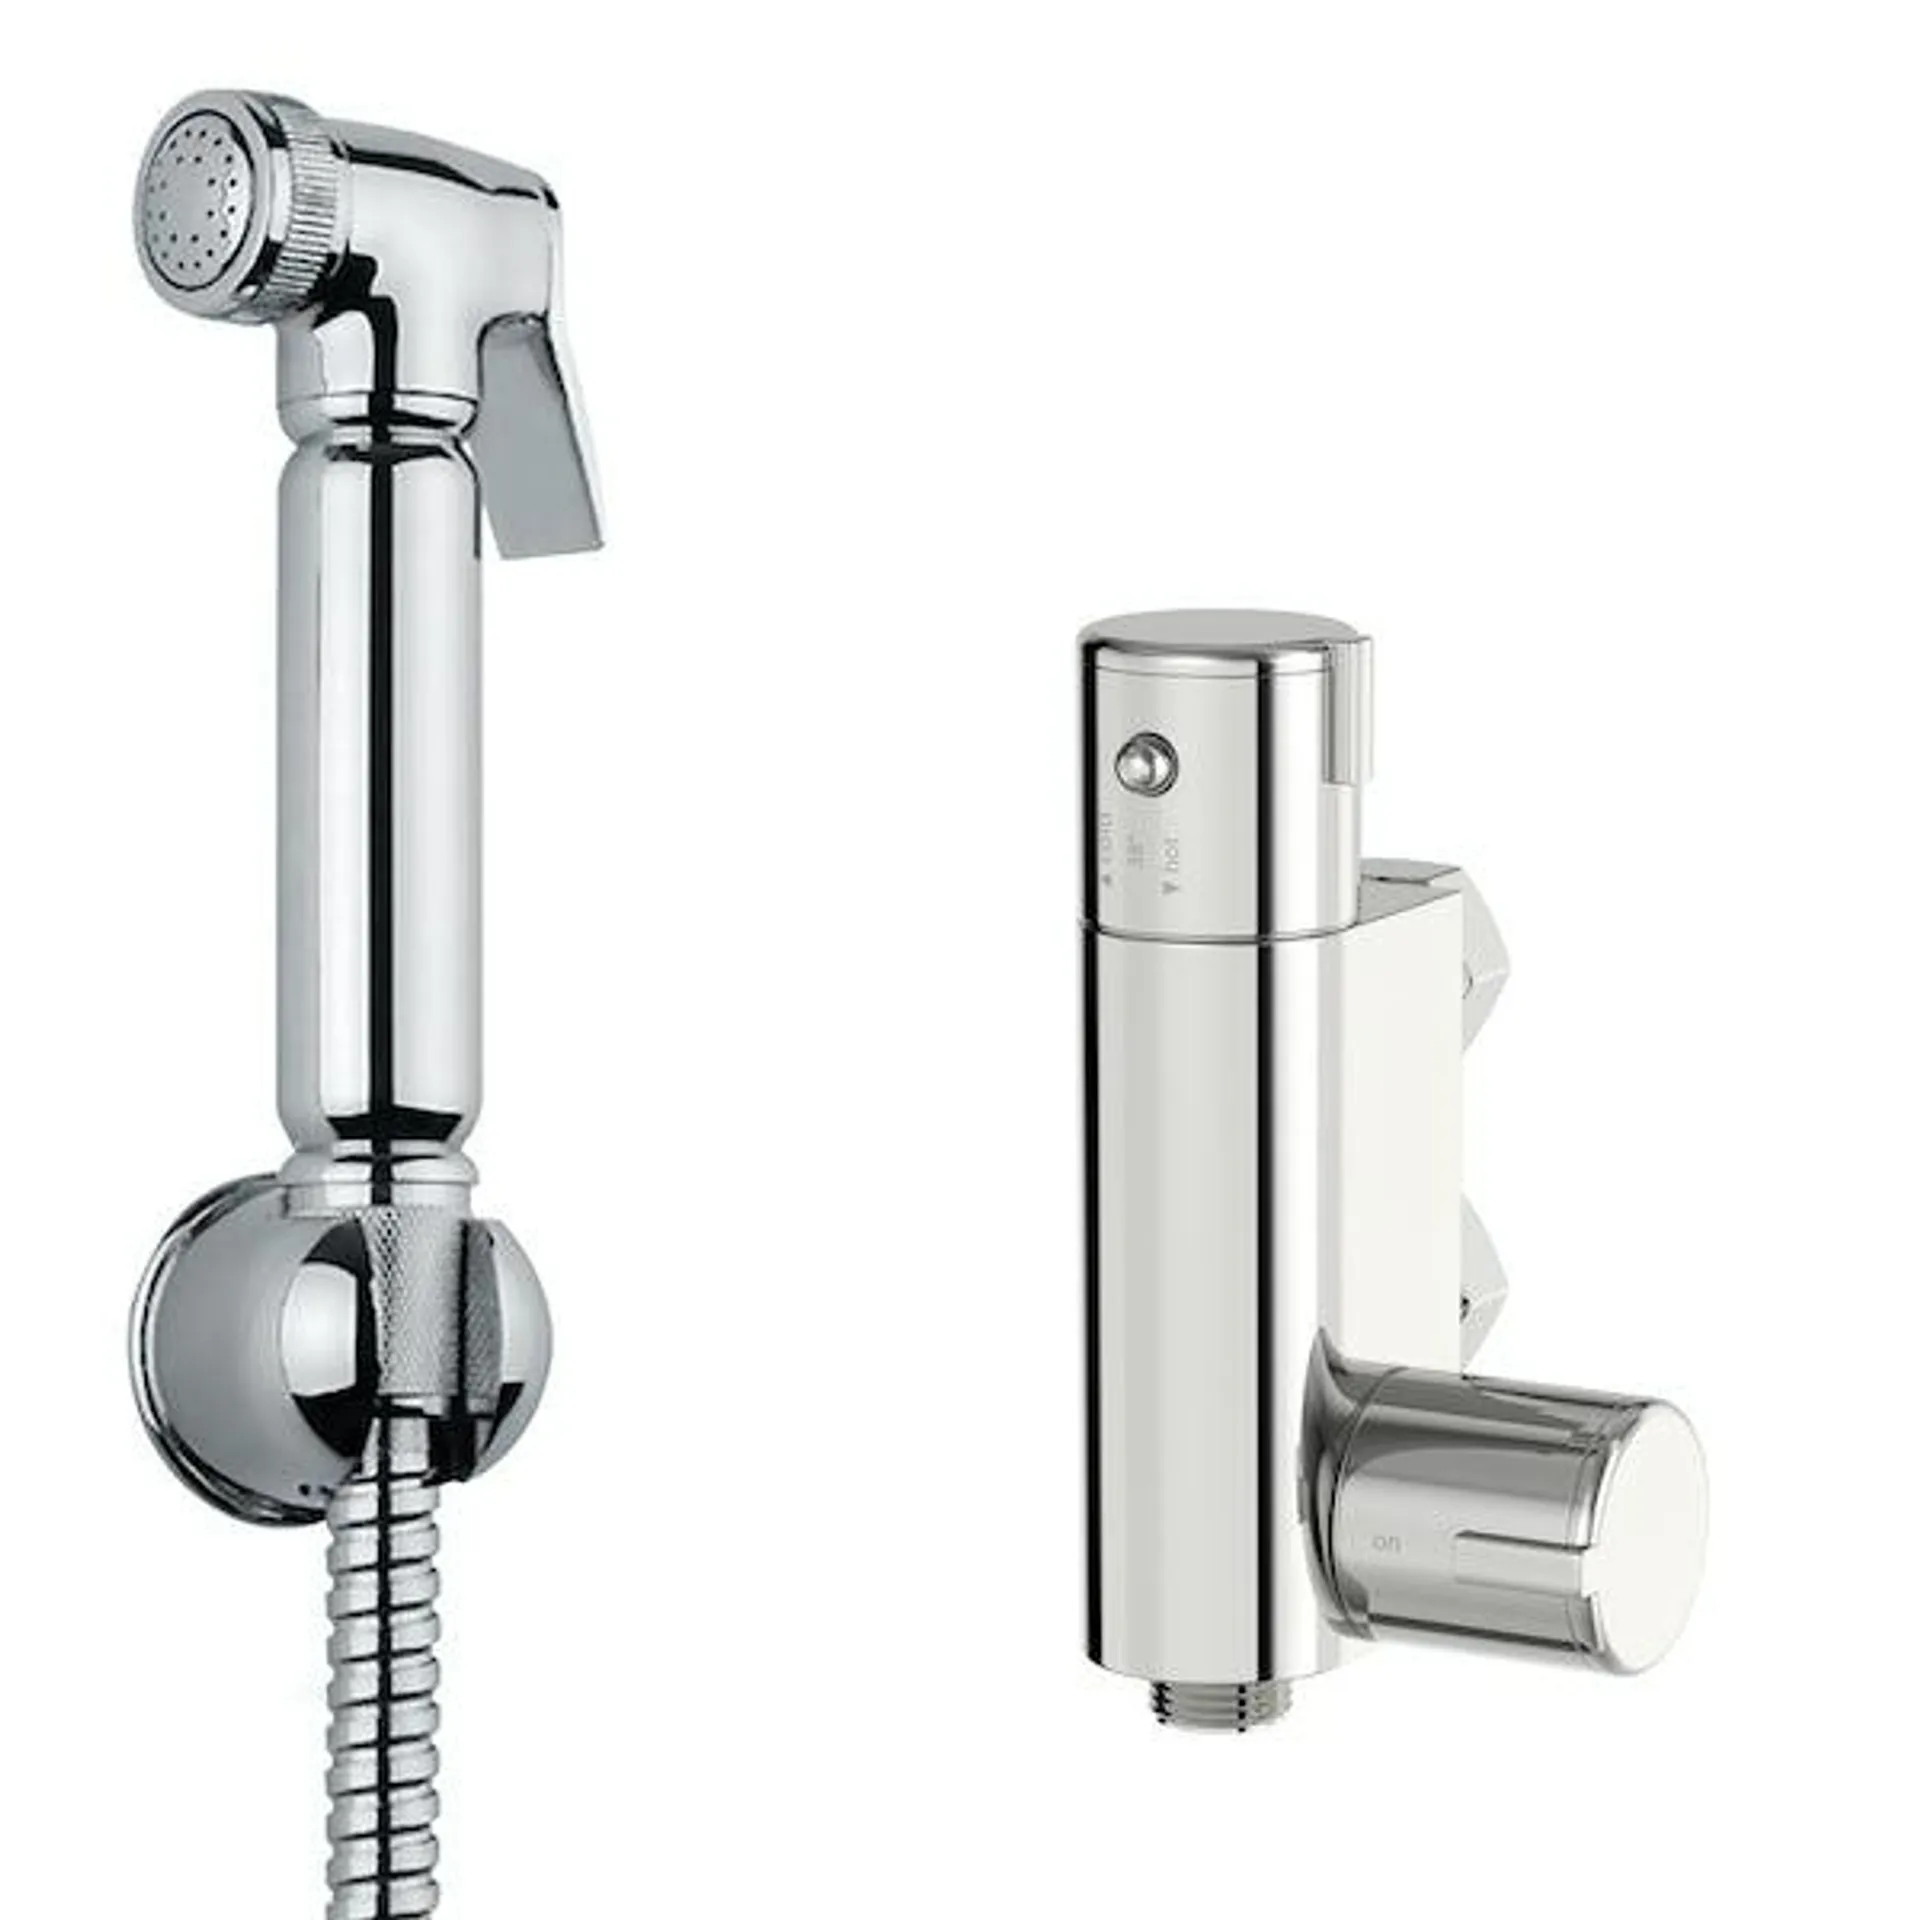 Orchard Douche kit with thermostatic mixer valve